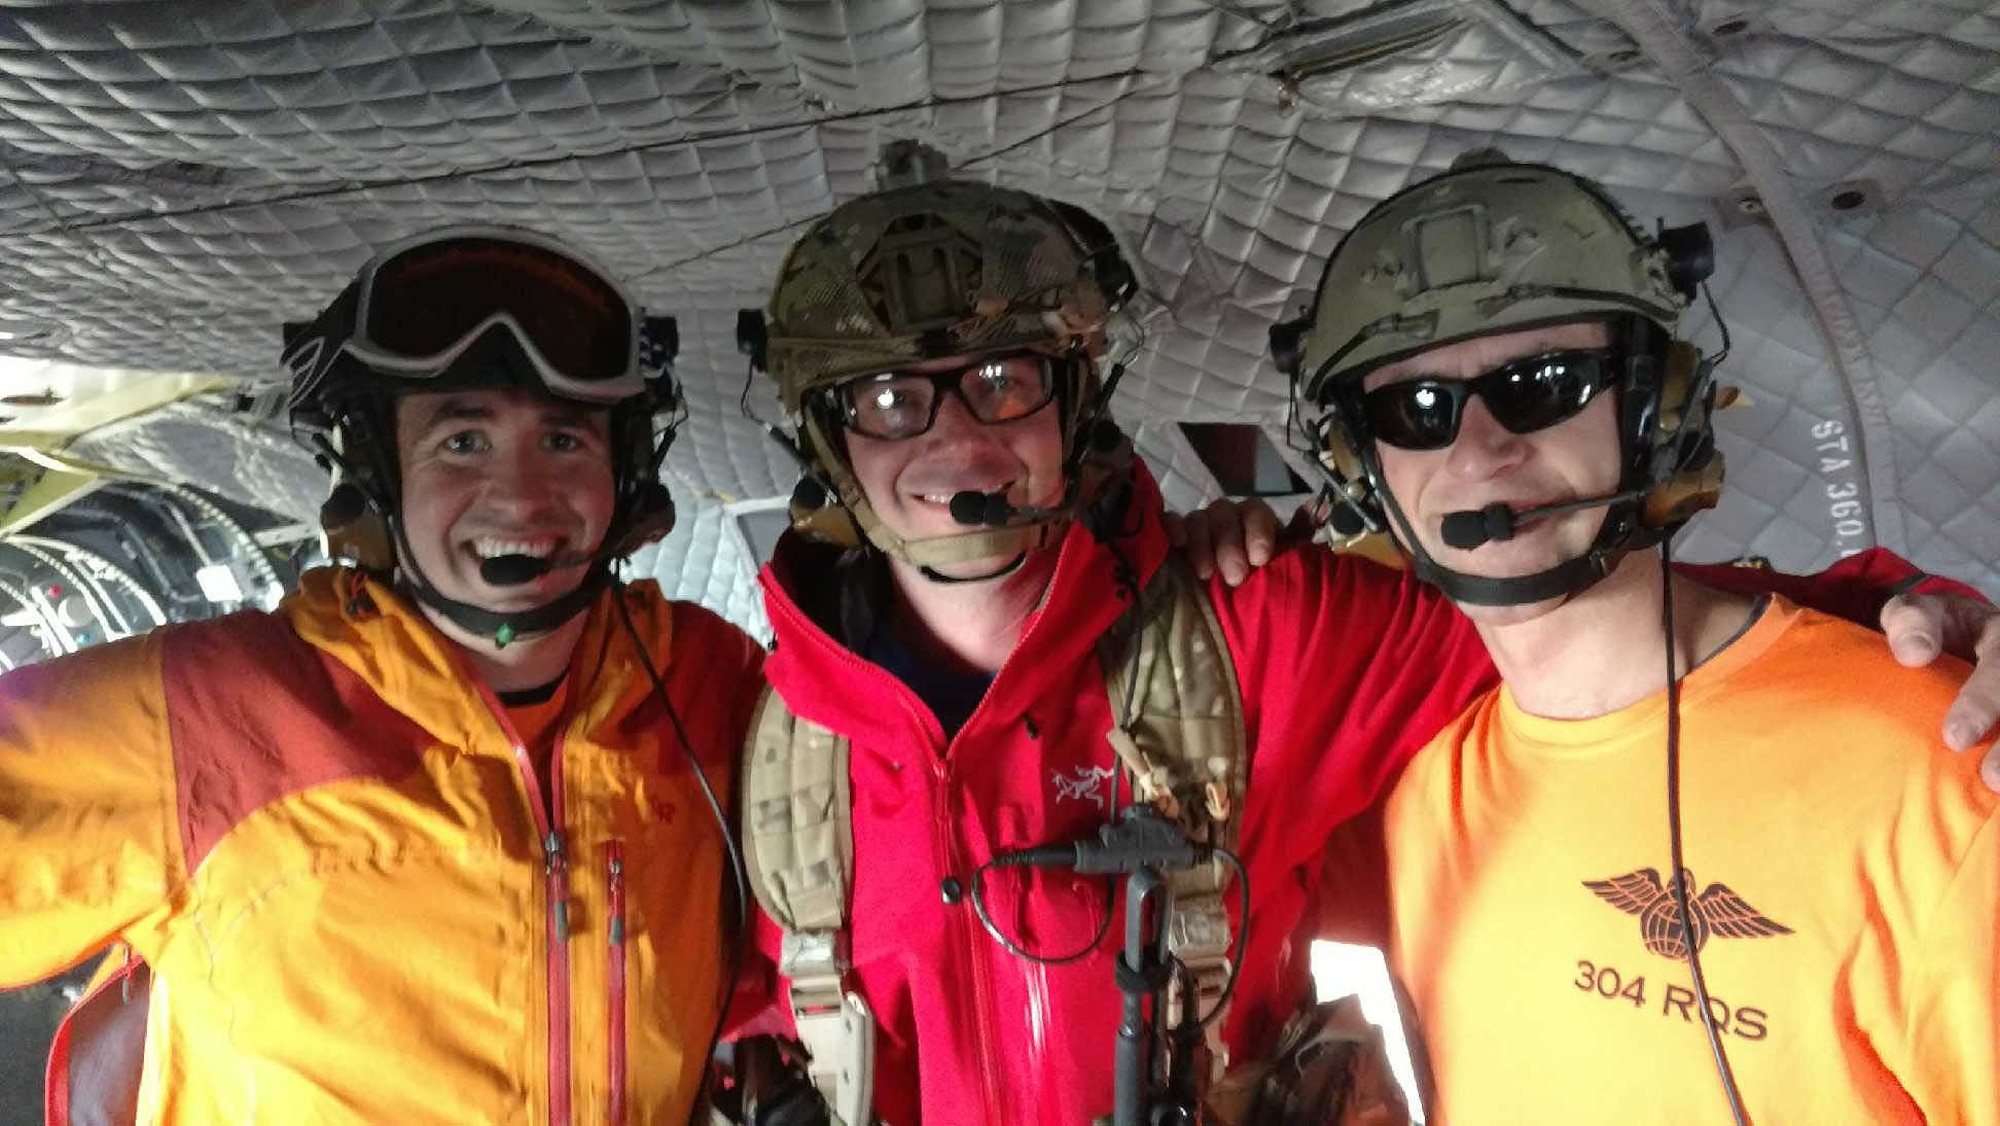 From left to right: Staff Sgts. Kevin and Ross, 304th Rescue Squadron pararescuemen, and Capt. Zachery, 304th RQS  combat rescue officer, pose on board a U.S. Army Reserve CH-47 Chinook rescue helicopter after rescuing a stranded climber on Mount Rainier, Washington. The 304th RQS is a geographically separated unit from the 920th Rescue Wing at Patrick Air Force Base, Florida. (U.S. Air Force courtesy photo)